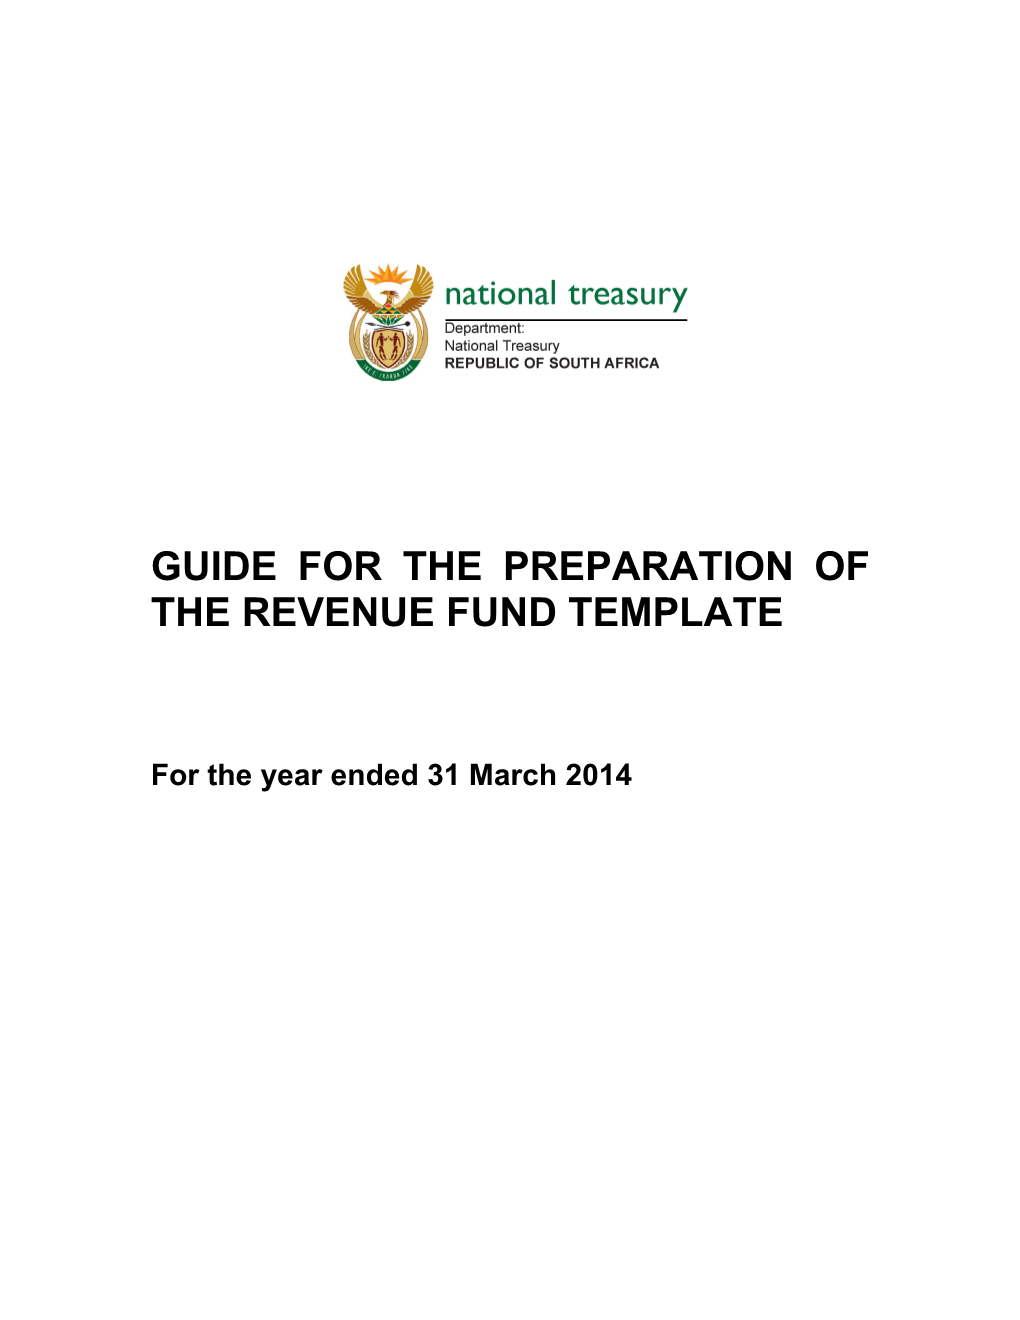 Guidance on Accounting Issues for the Revenue Funds